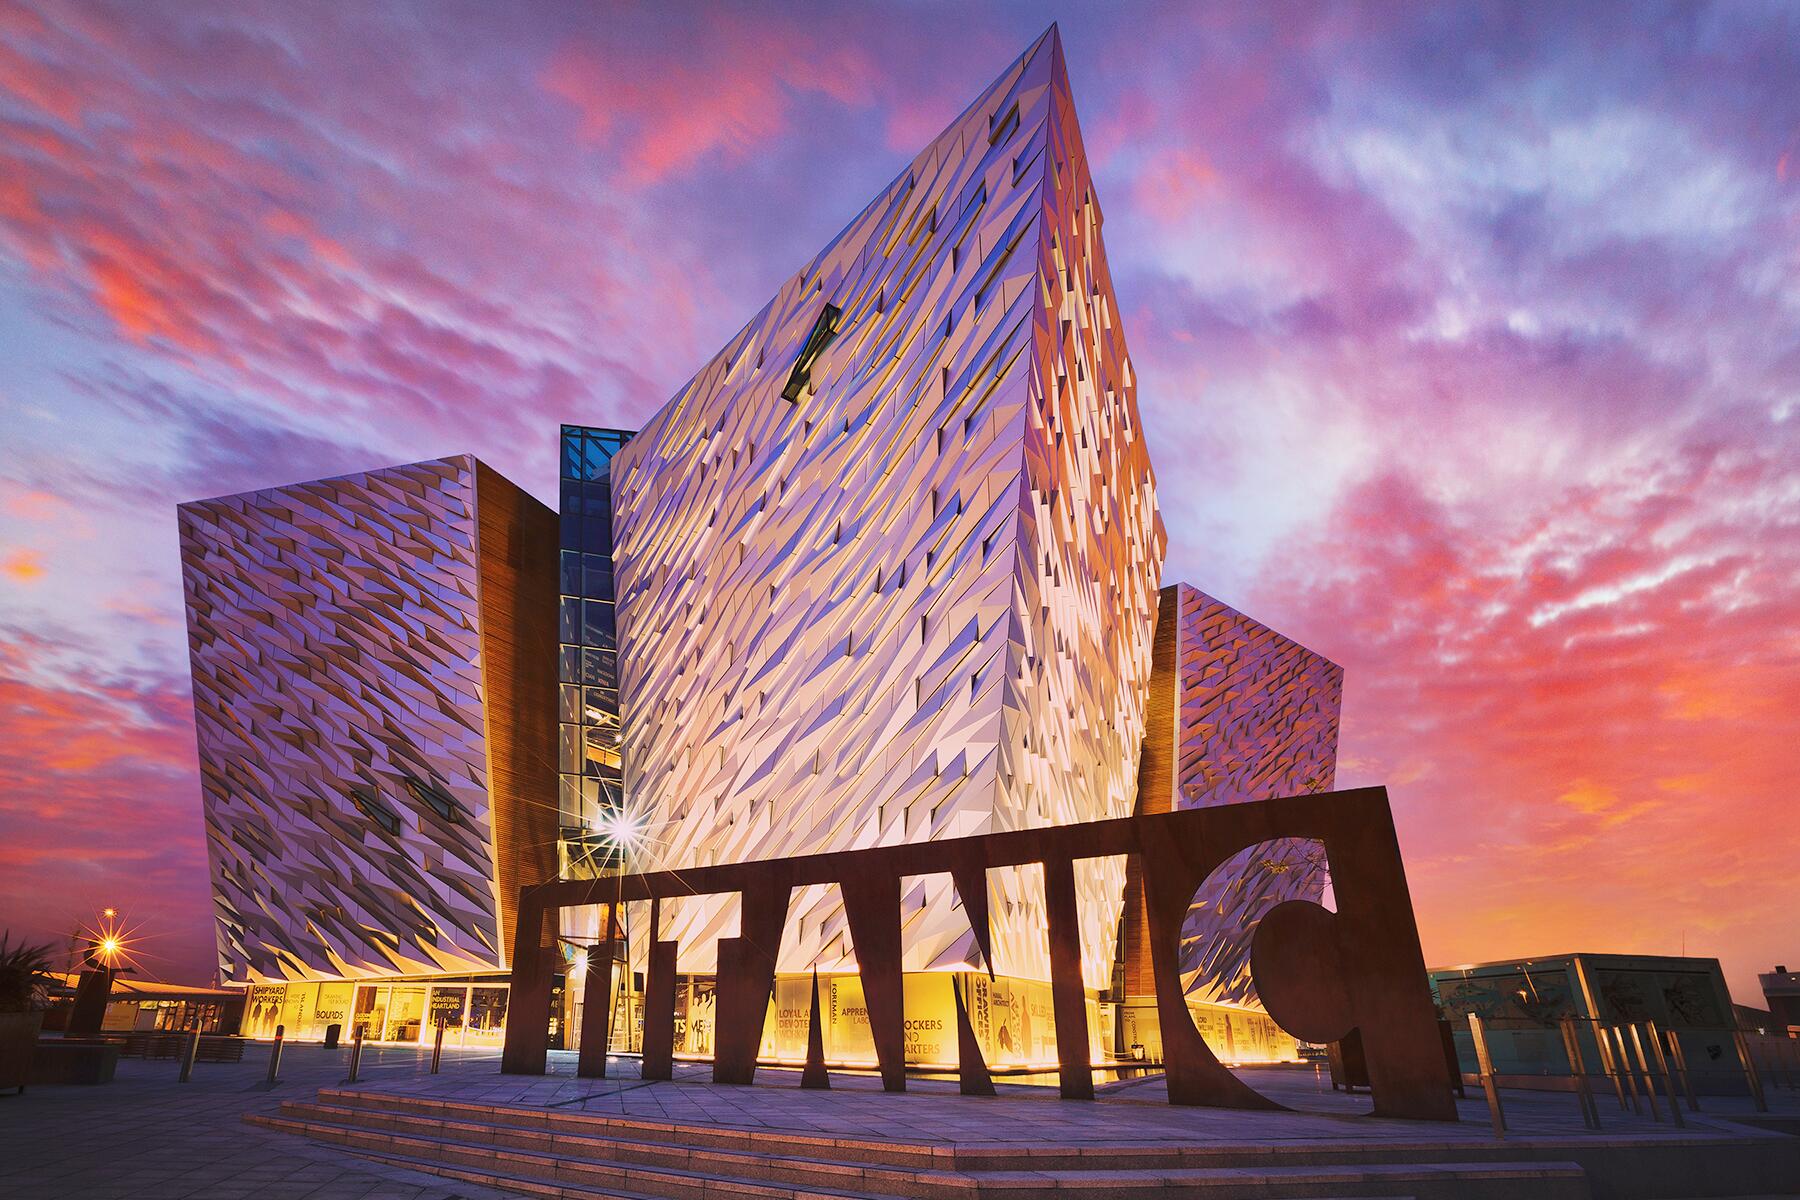 <a href='https://www.fodors.com/world/europe/ireland/experiences/news/photos/ultimate-things-to-do-in-ireland#'>From &quot;25 Ultimate Things to Do In Ireland: Discover Belfast’s Titanic Quarter&quot;</a>